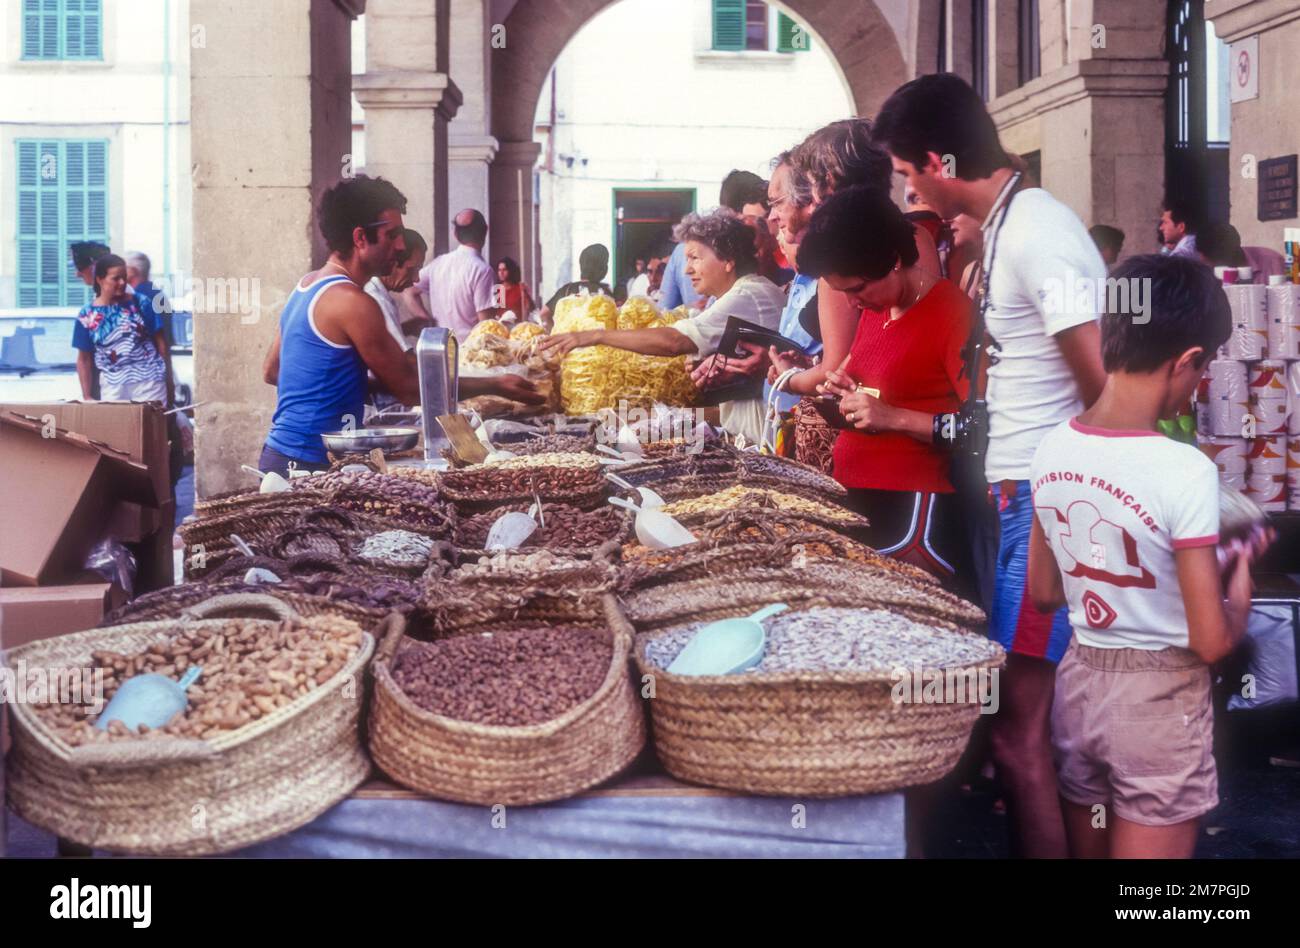 1981 archive image of tourists at a stall on Felanitx market, Majorca, Spain. Stock Photo